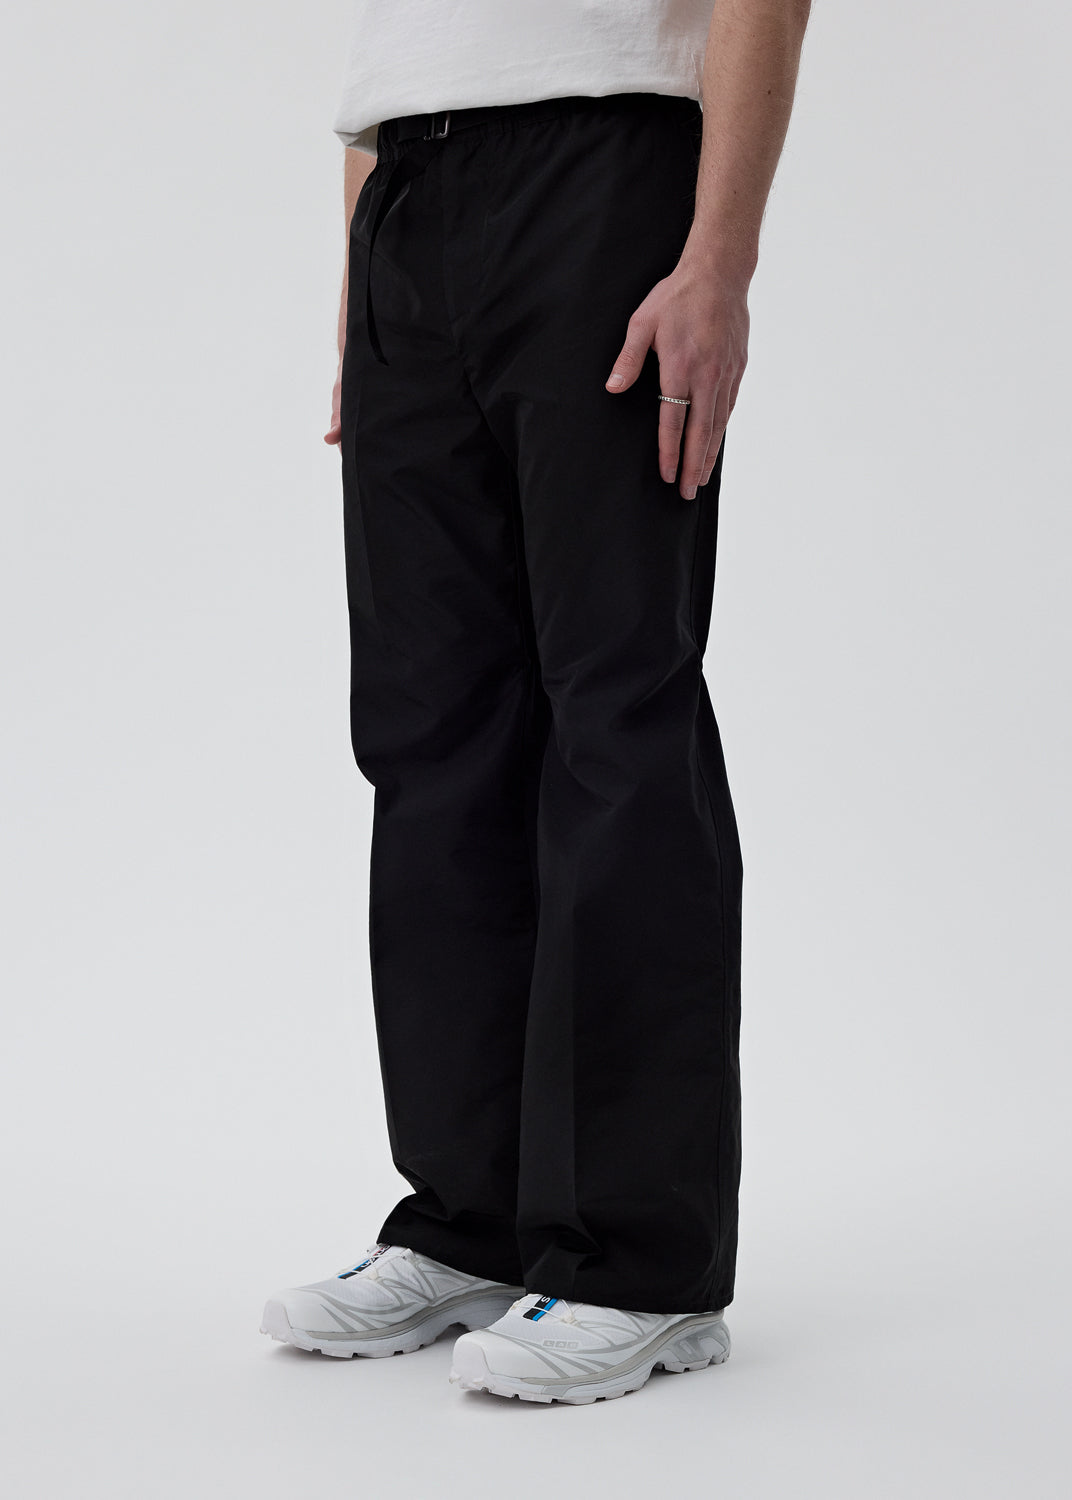 Common/divisor double knee wide trousers